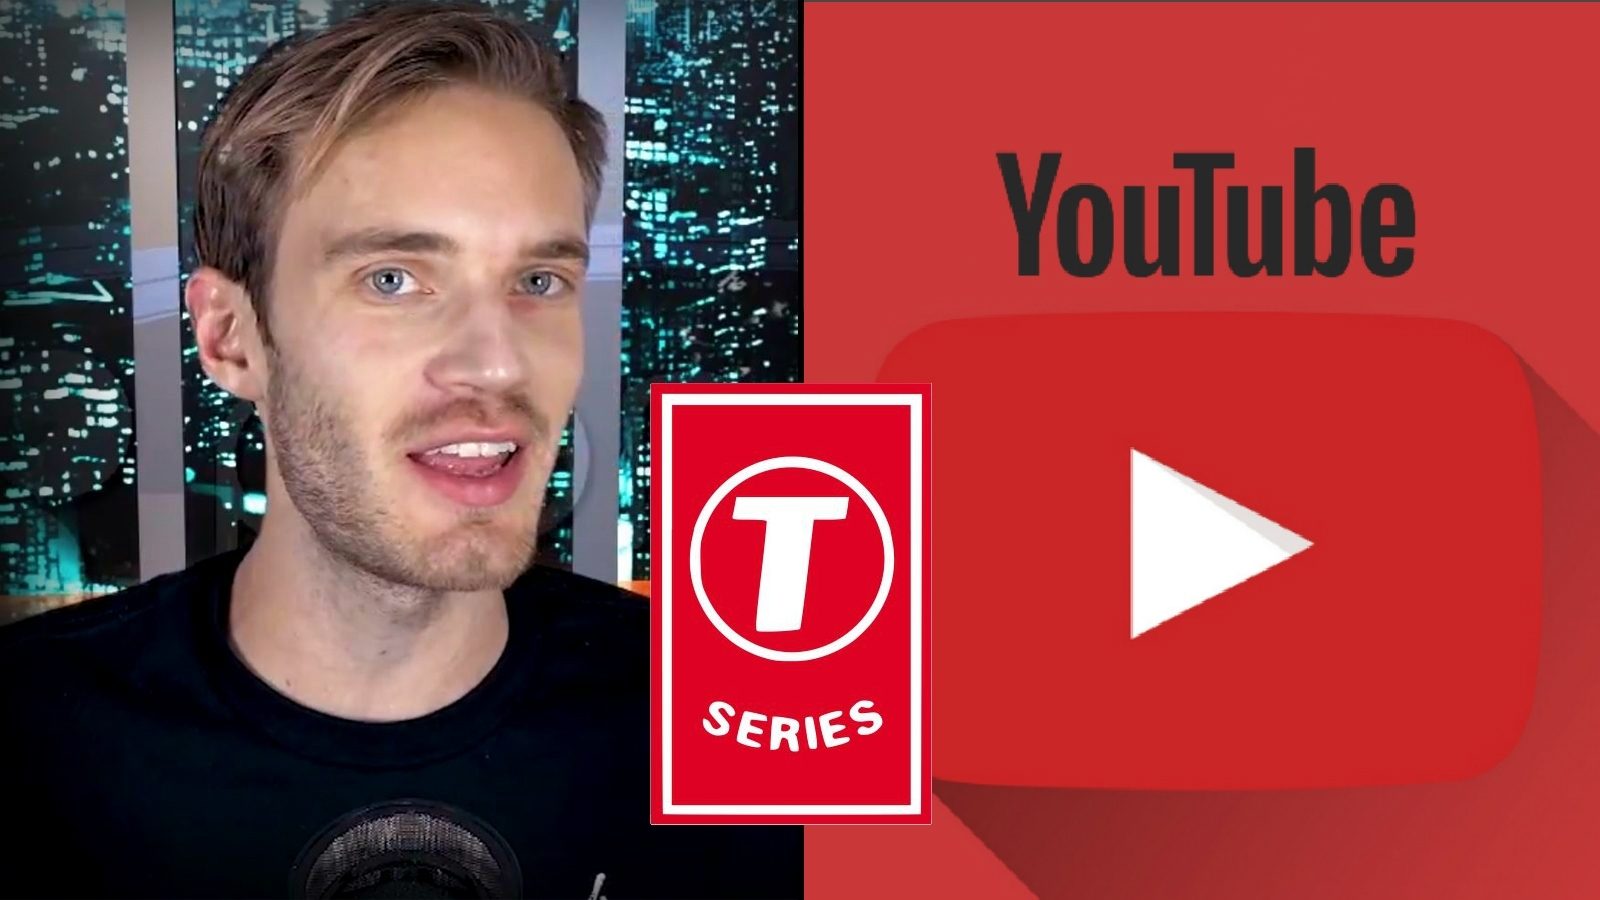 Current subscribers of T-Series are very close to PewDiePie. 